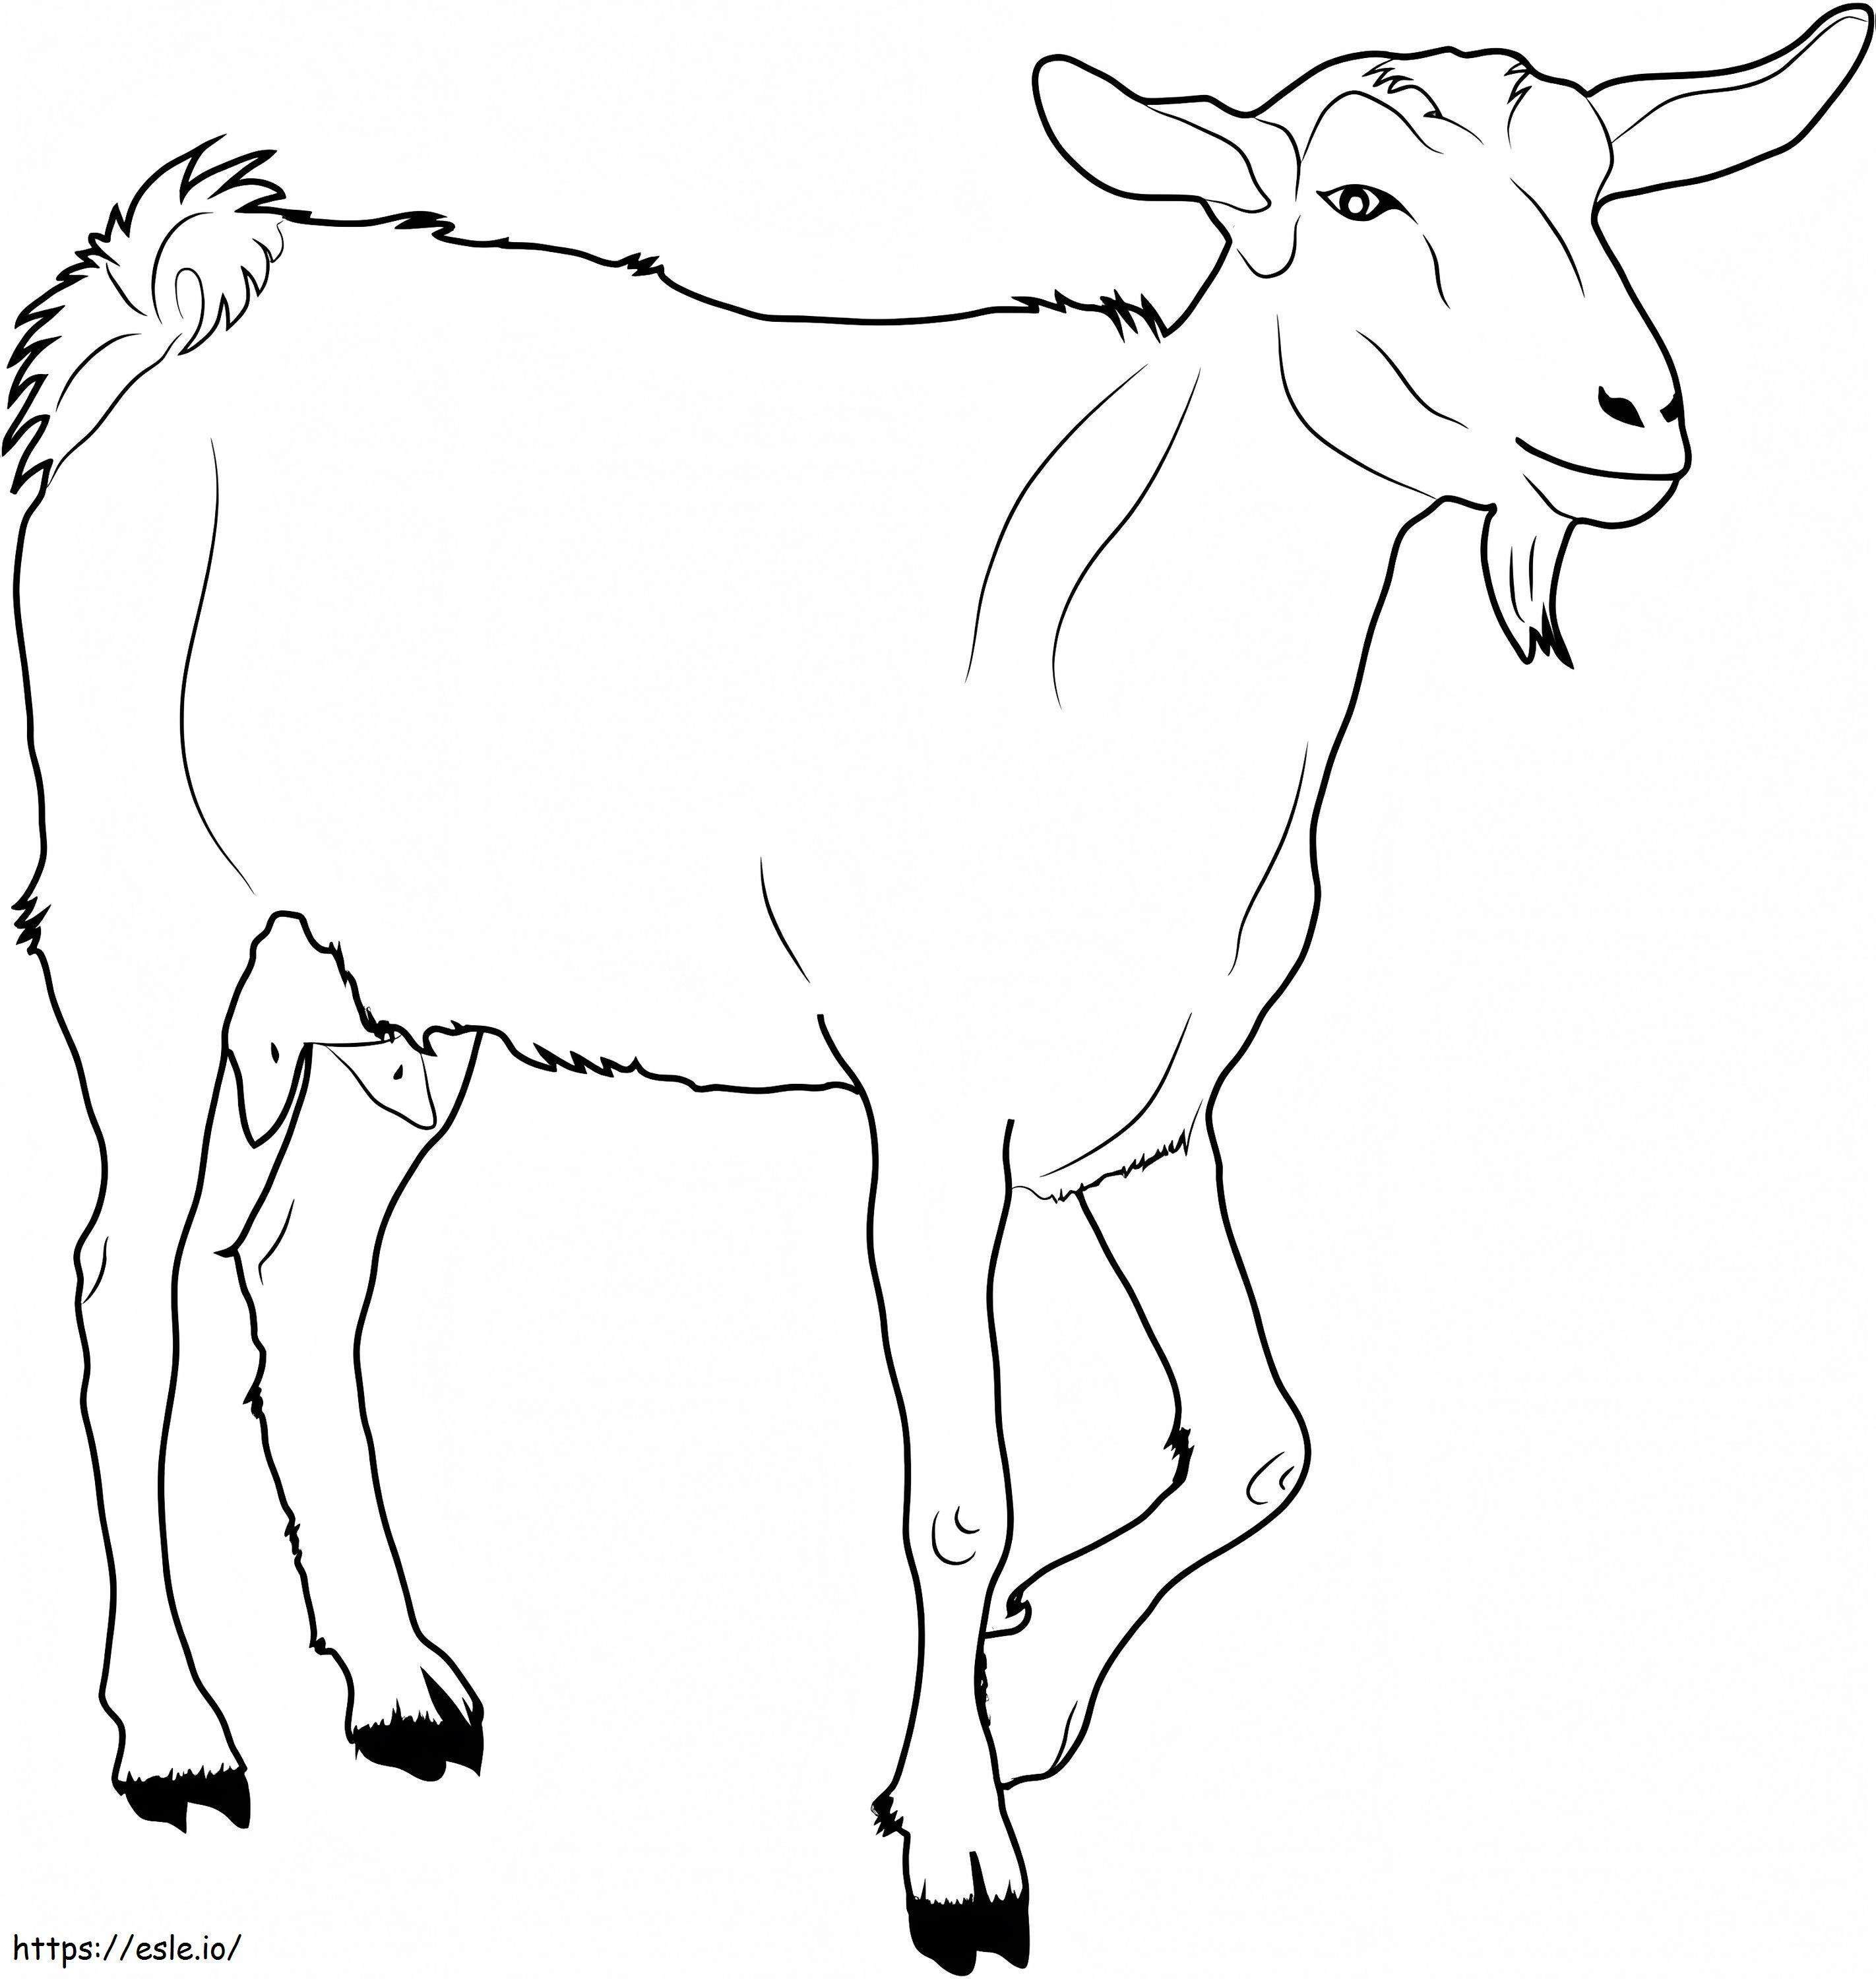 Goat Walking coloring page